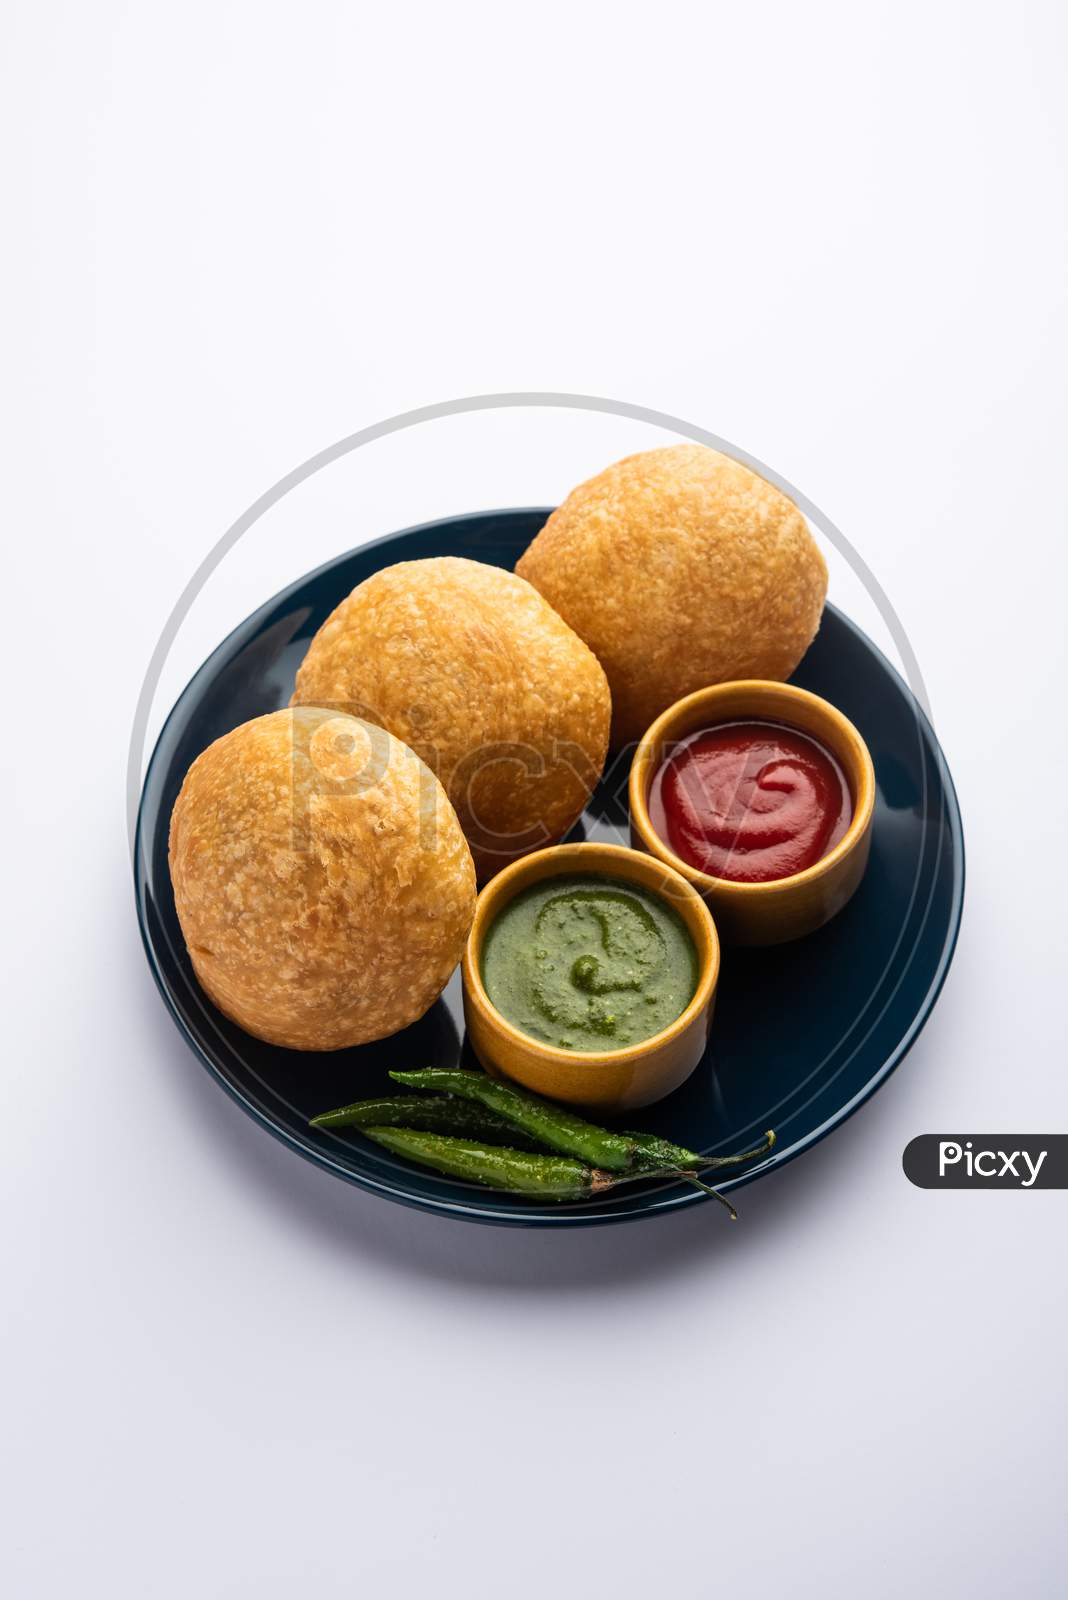 Kachori Is A Flat Spicy Snack From India Also Spelled As Kachauri And Kachodi. Served With Tomato Ketchup. Selective Focus